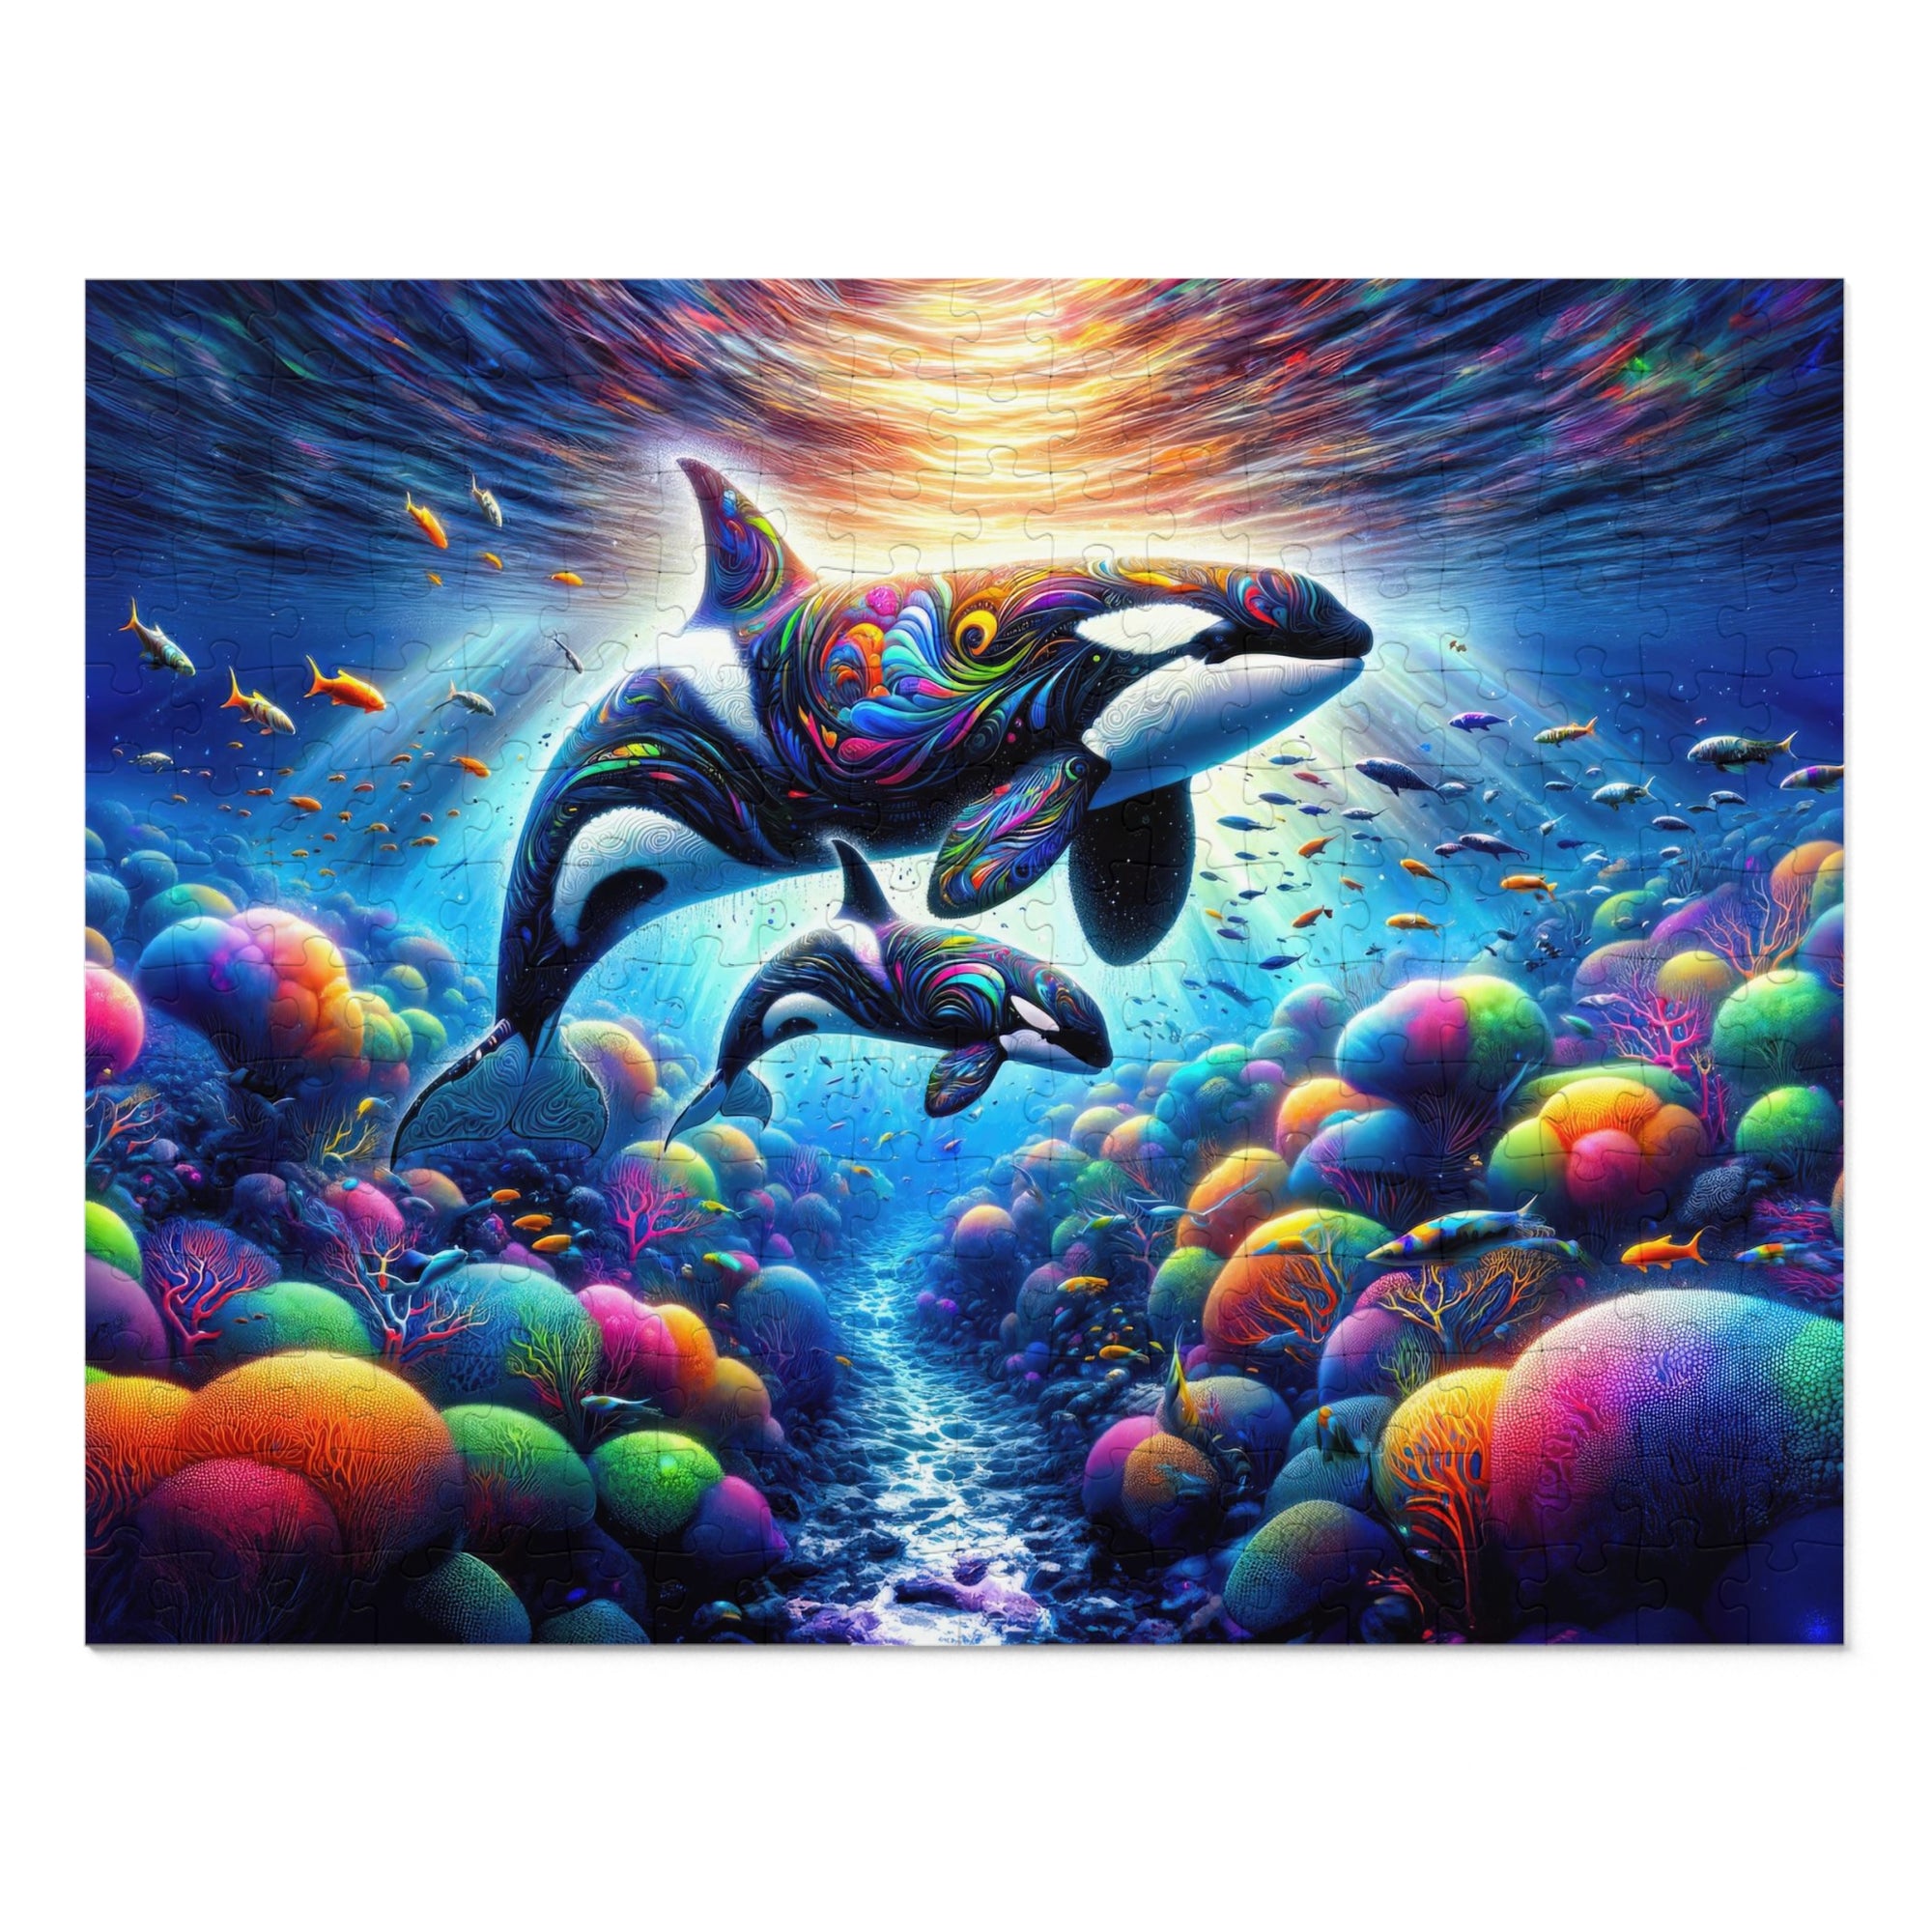 Lullaby of the Luminous Depths Jigsaw Puzzle